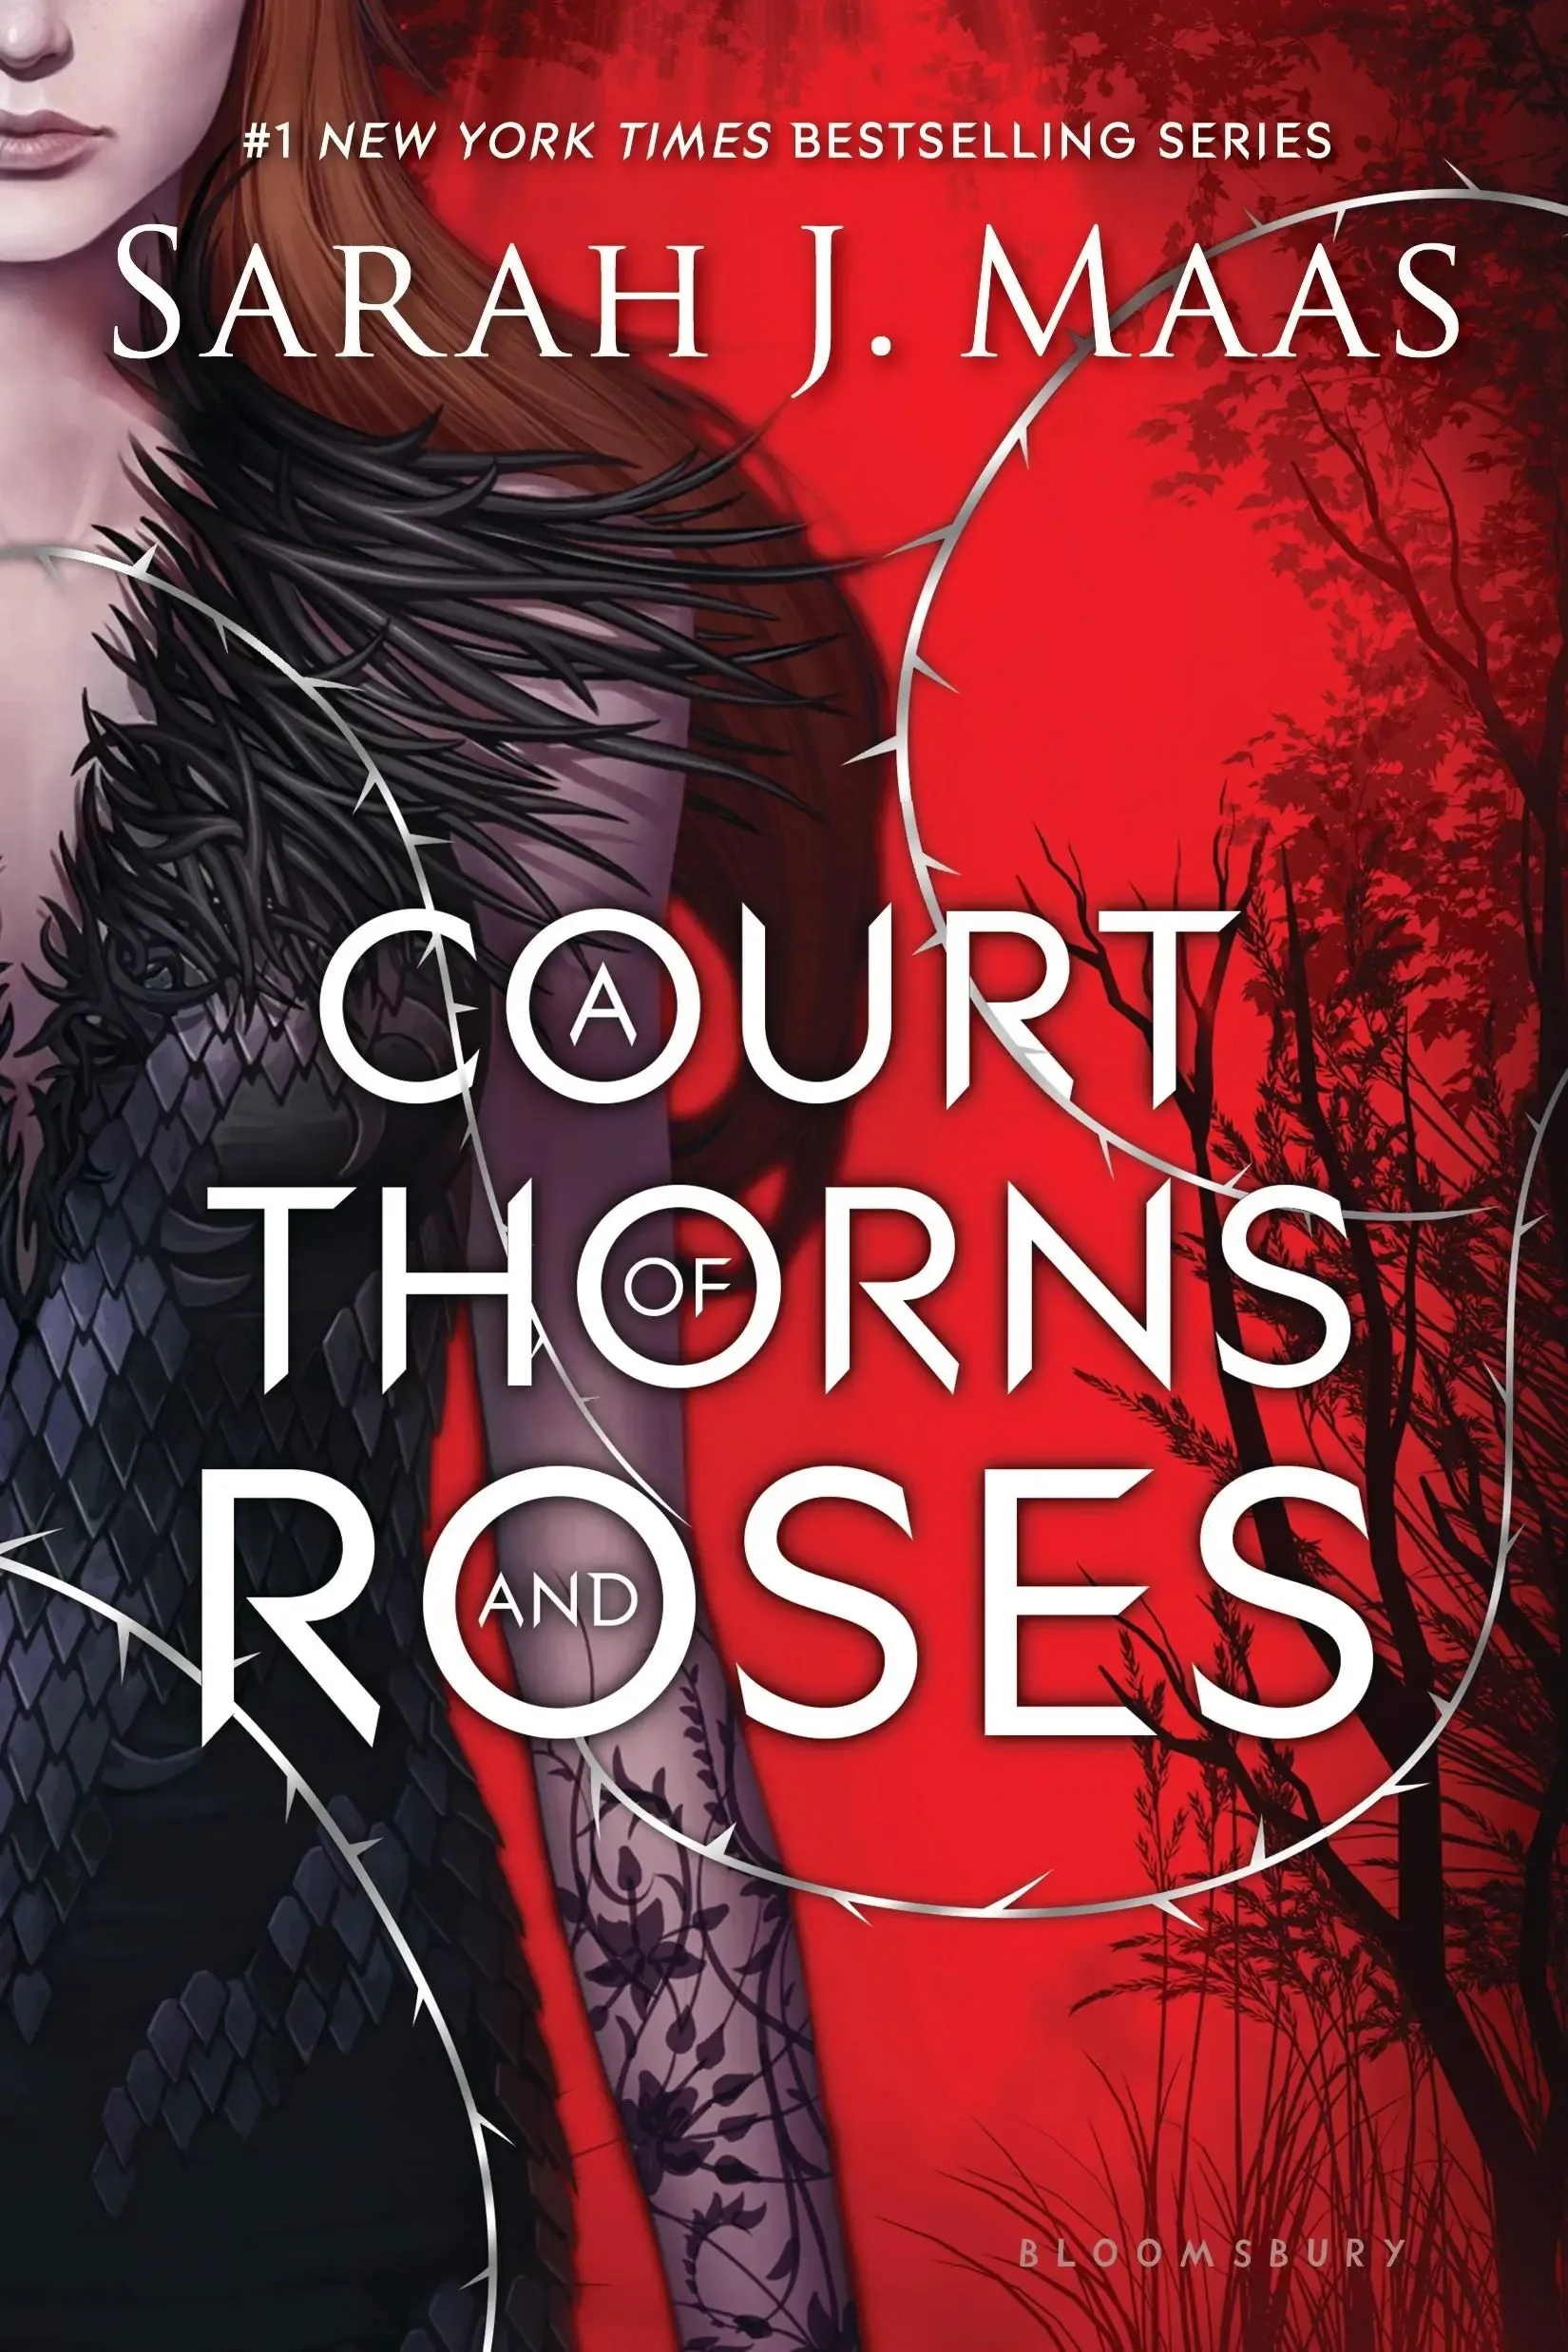 A Court of Thorns and Roses Spicy Chapters